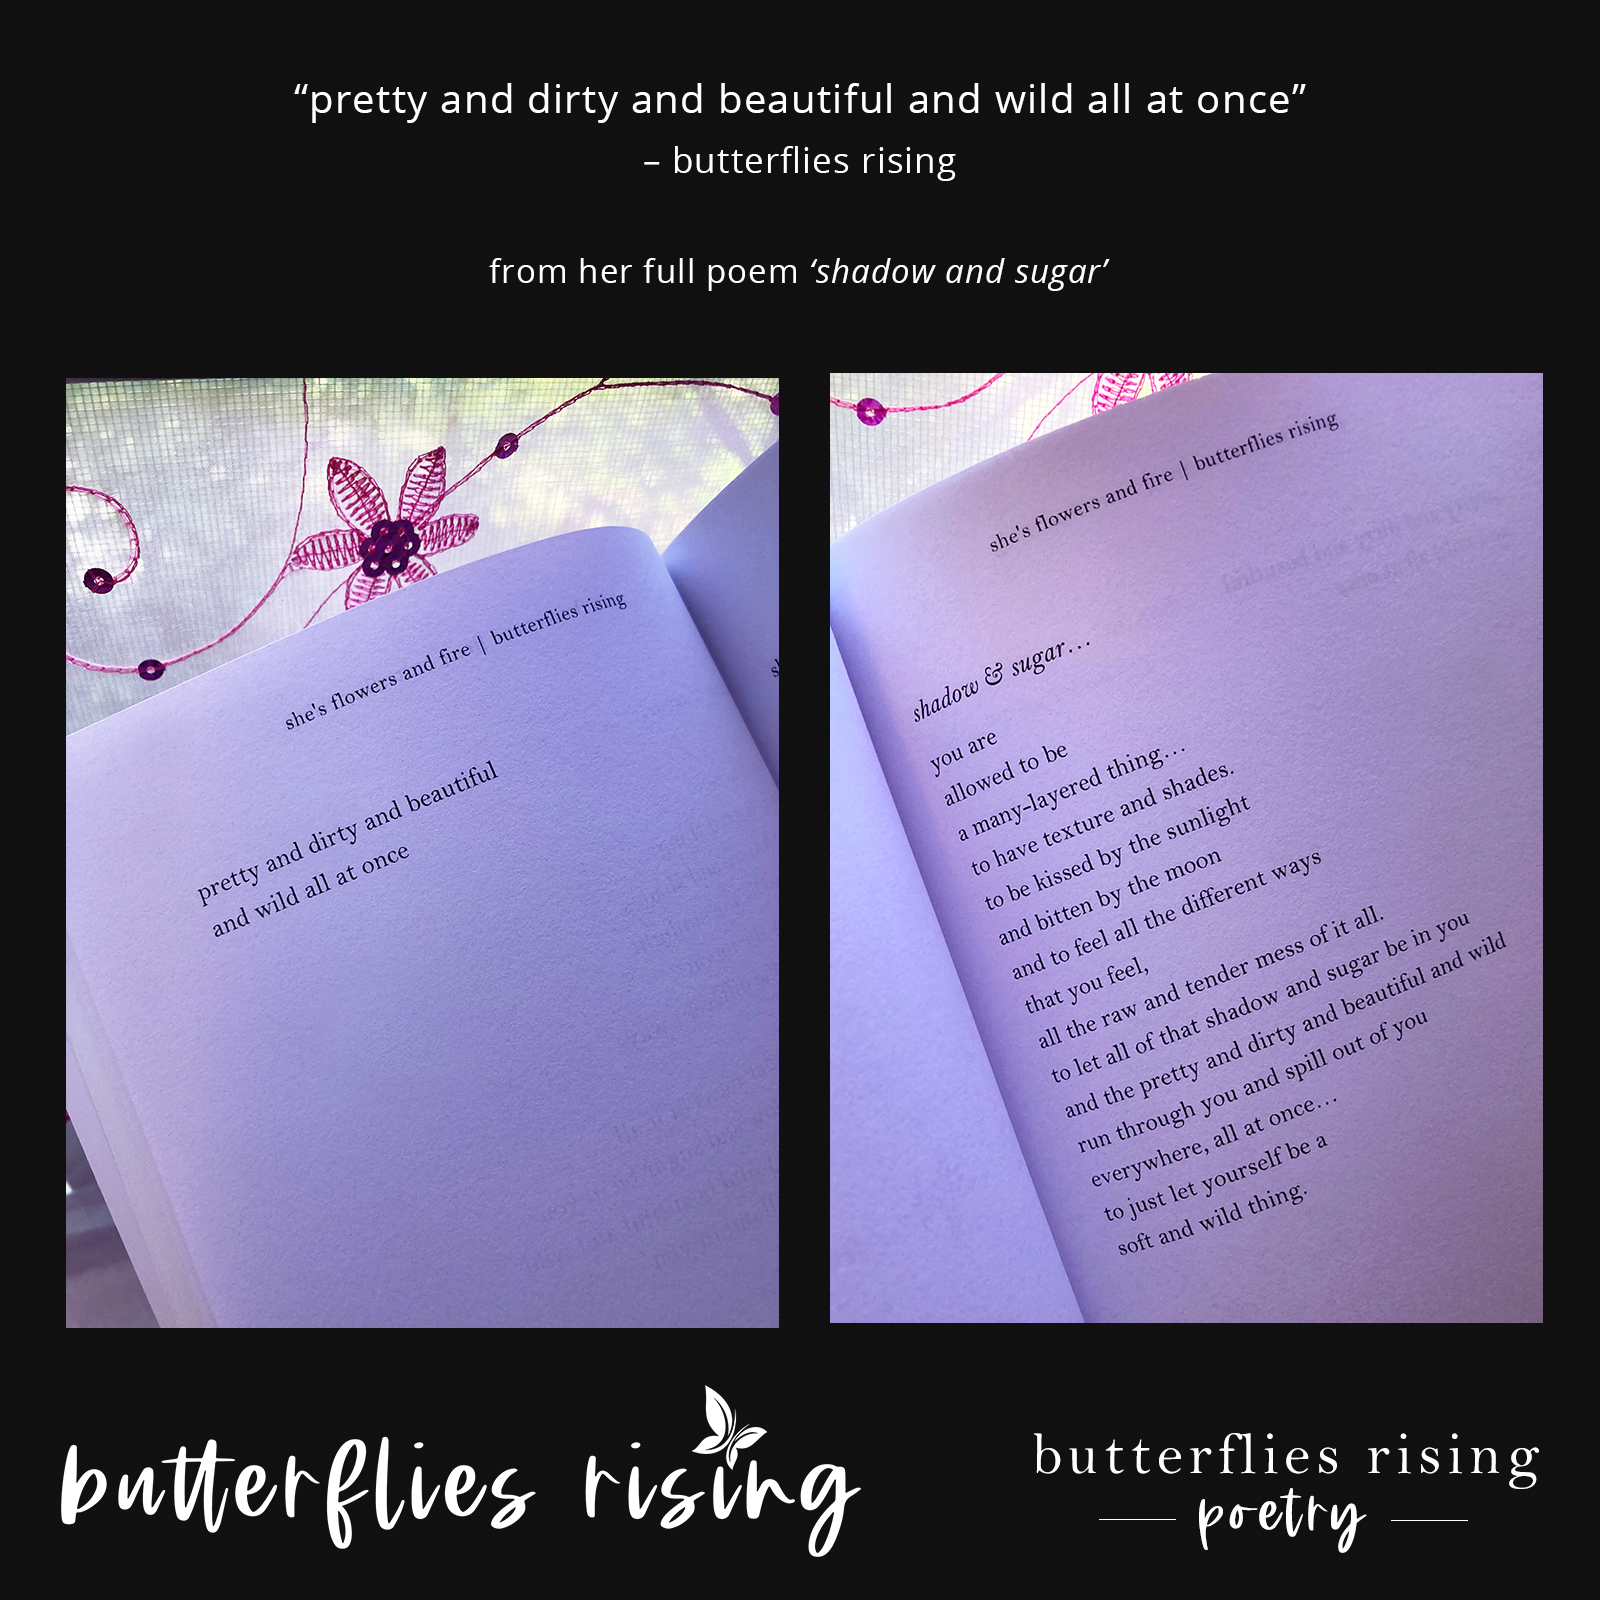 pretty and dirty and beautiful and wild all at once - butterflies rising